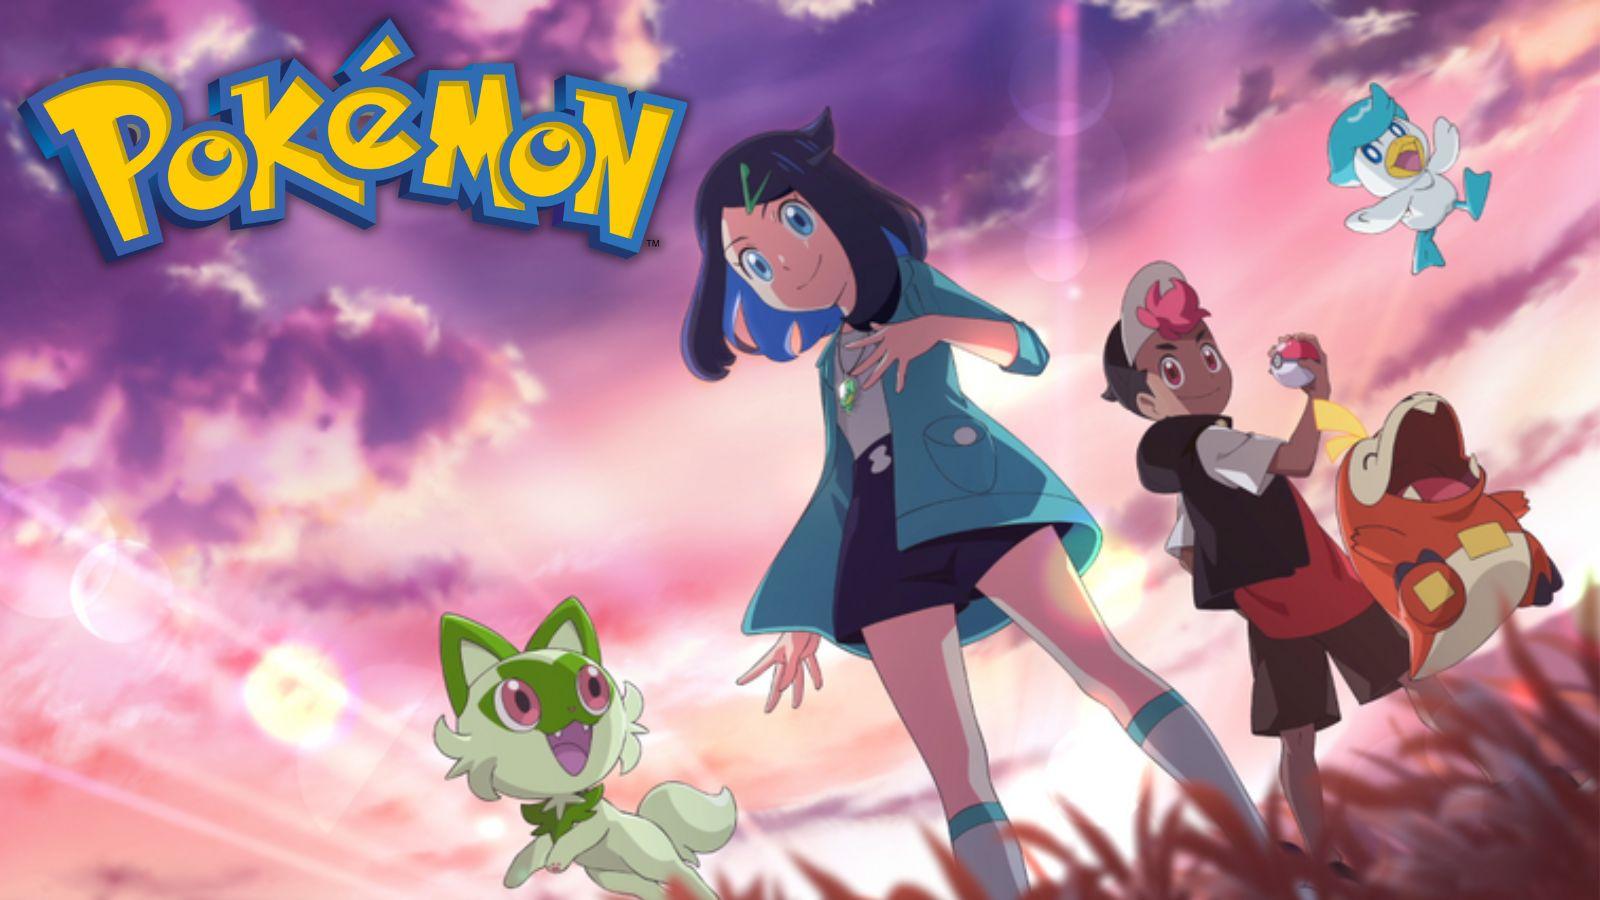 danyelle ryan recommends pokemon full episodes free pic